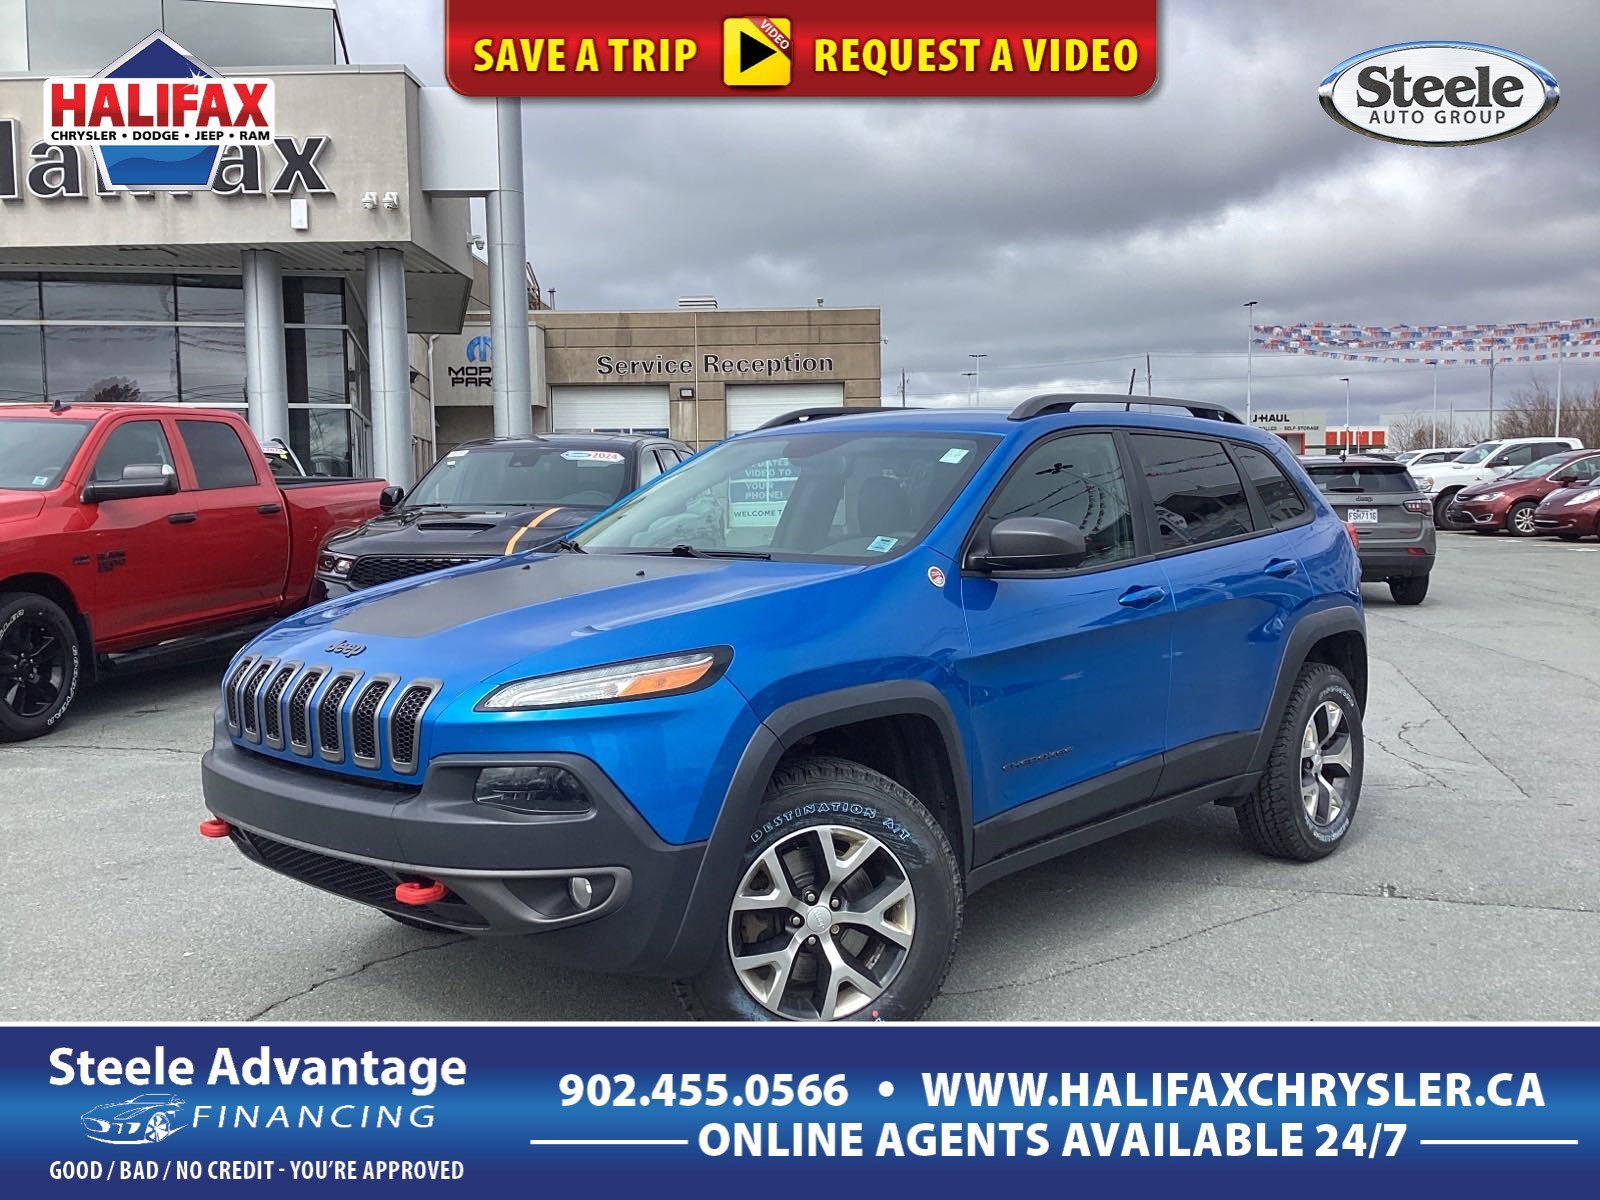 2017 Jeep Cherokee Trailhawk - LOW KM, LEATHER TRIMMED SEATS, V6, POW